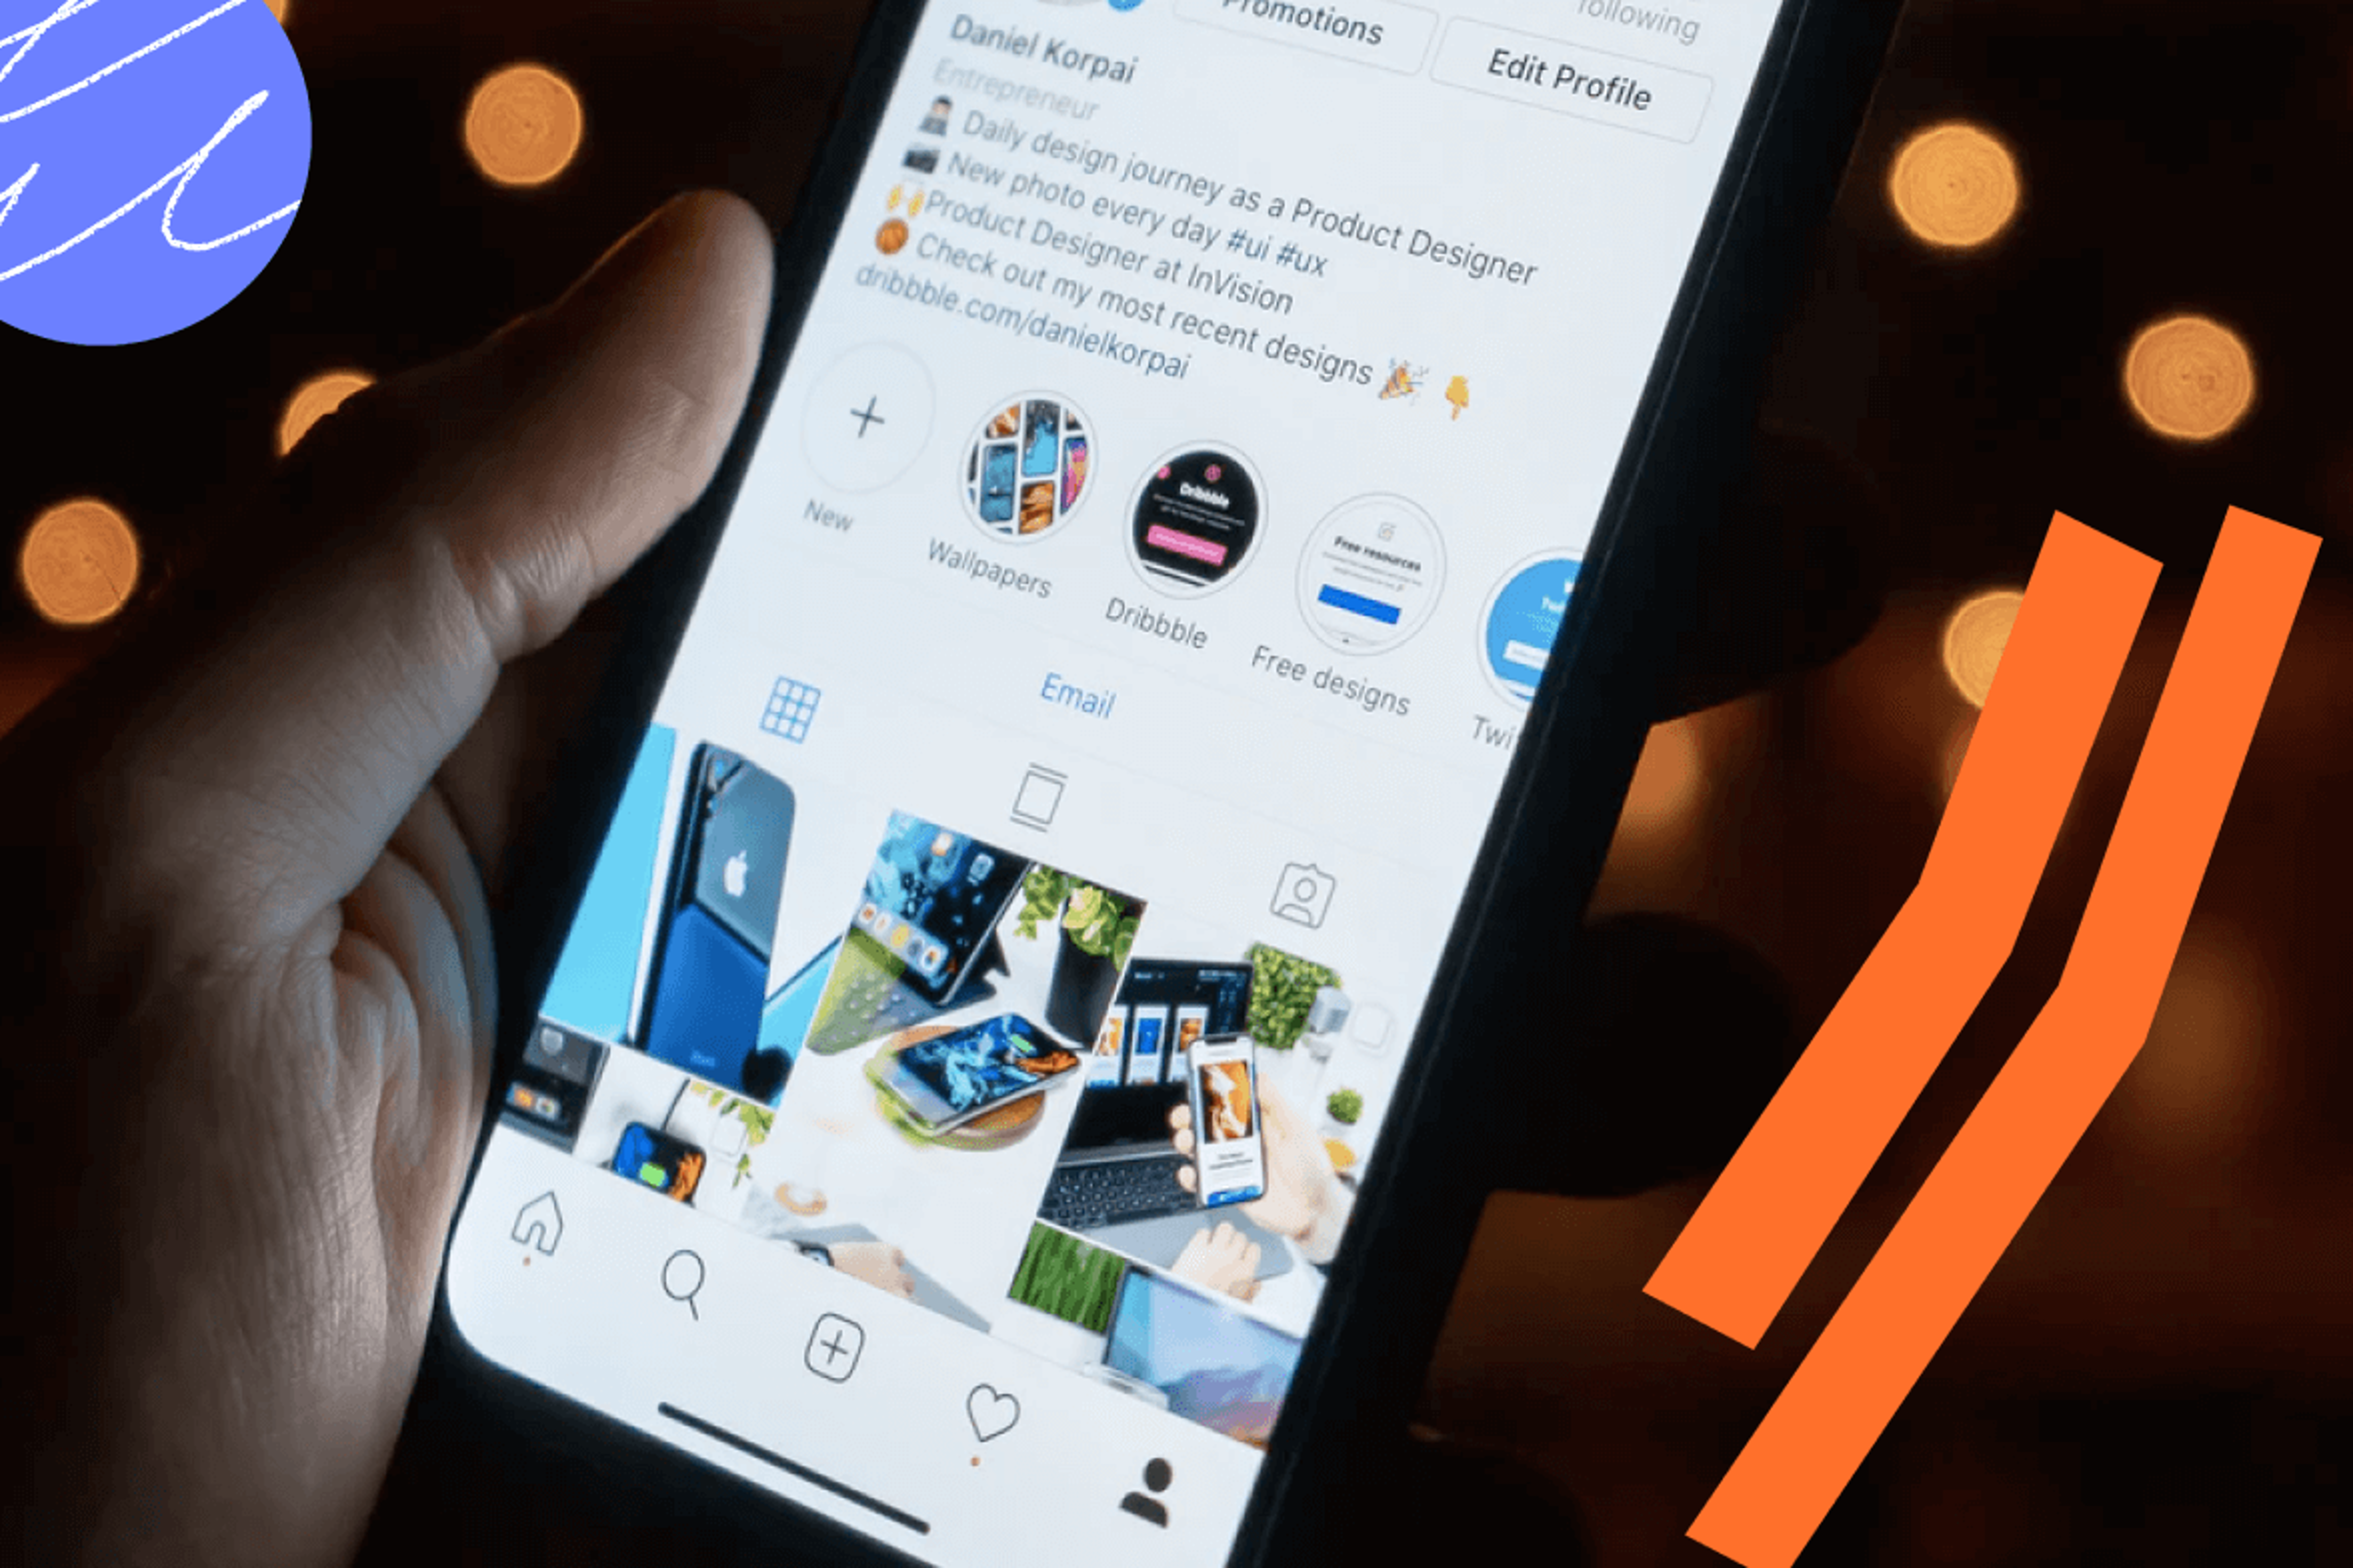 A Guide to Instagram Highlights for Small Businesses